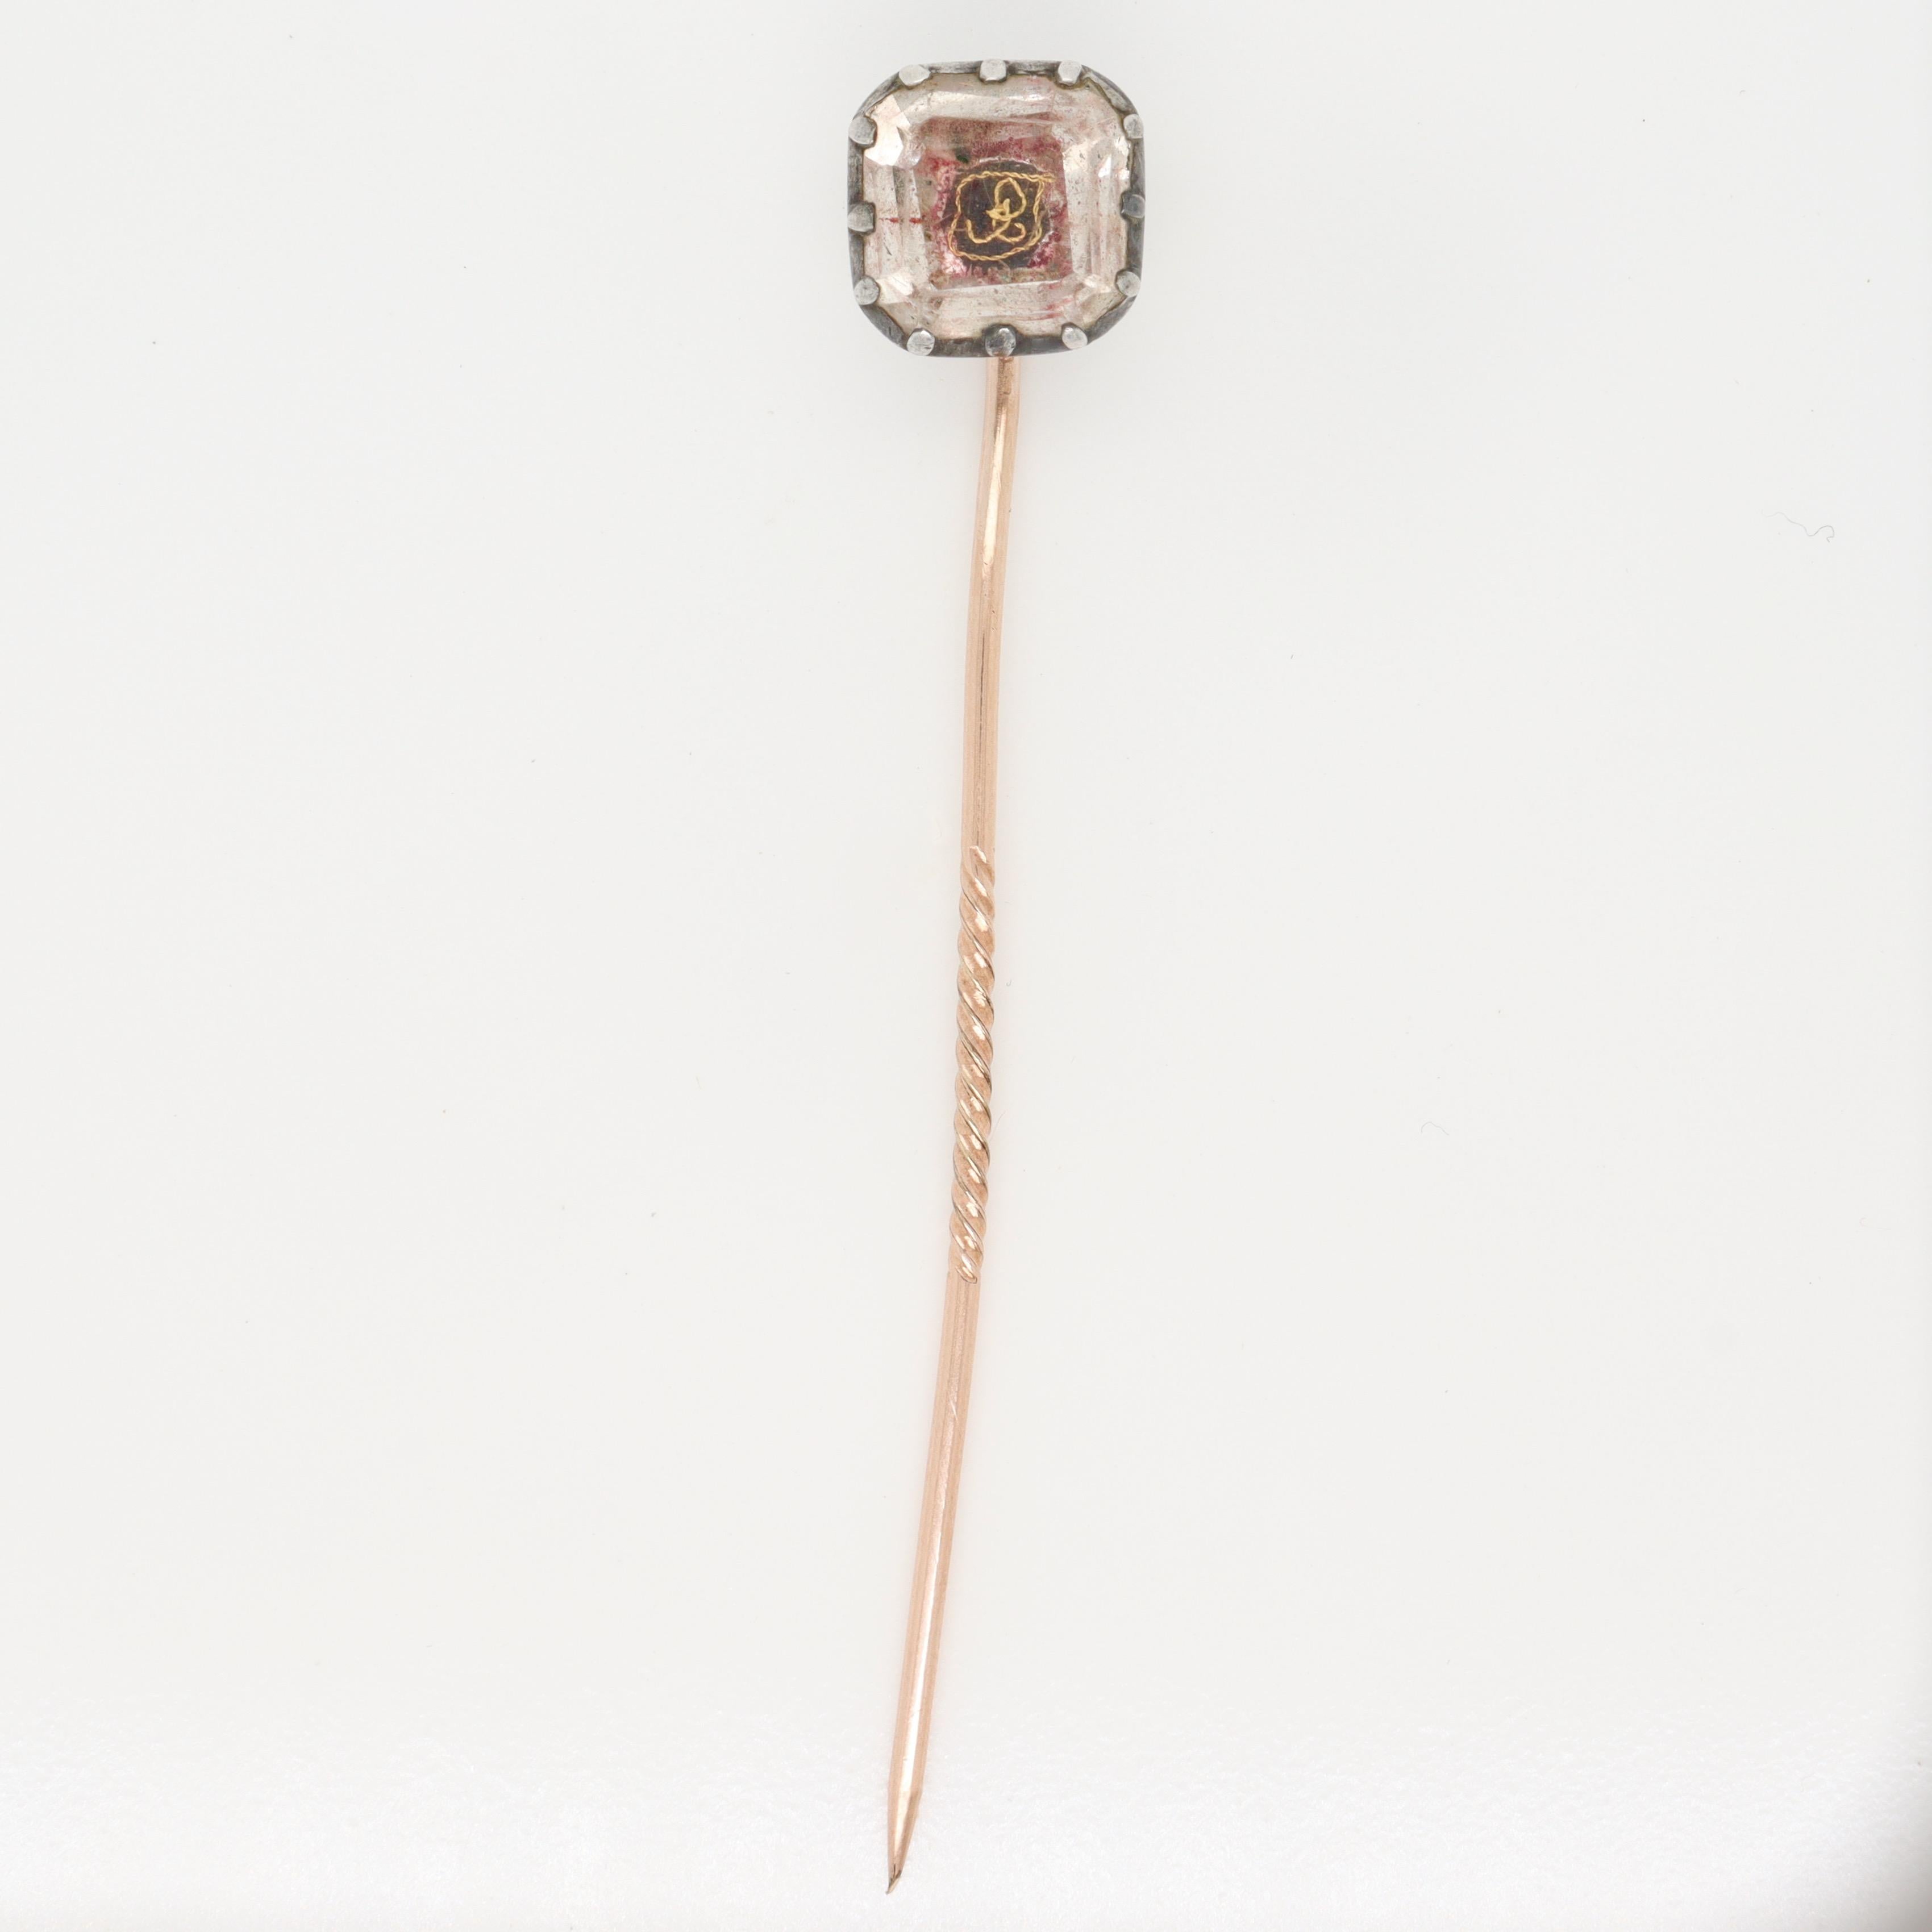 Antique 17th / 18th Century English Foiled Stuart Crystal Stick Pin In Fair Condition For Sale In Philadelphia, PA